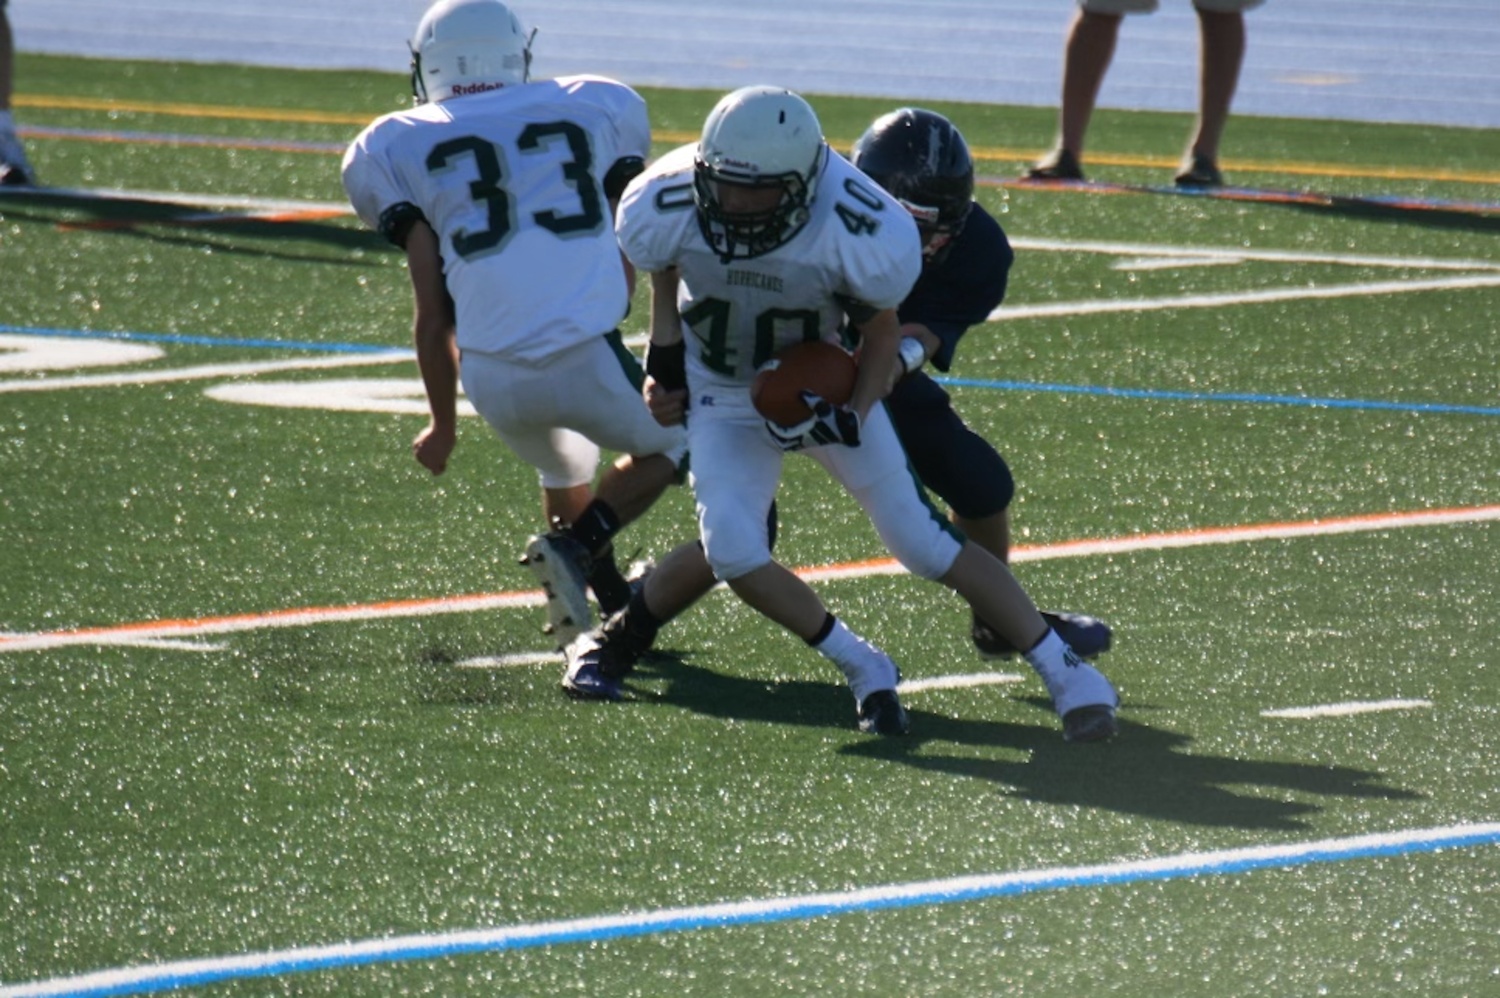 Dylan Laube playing middle school football.